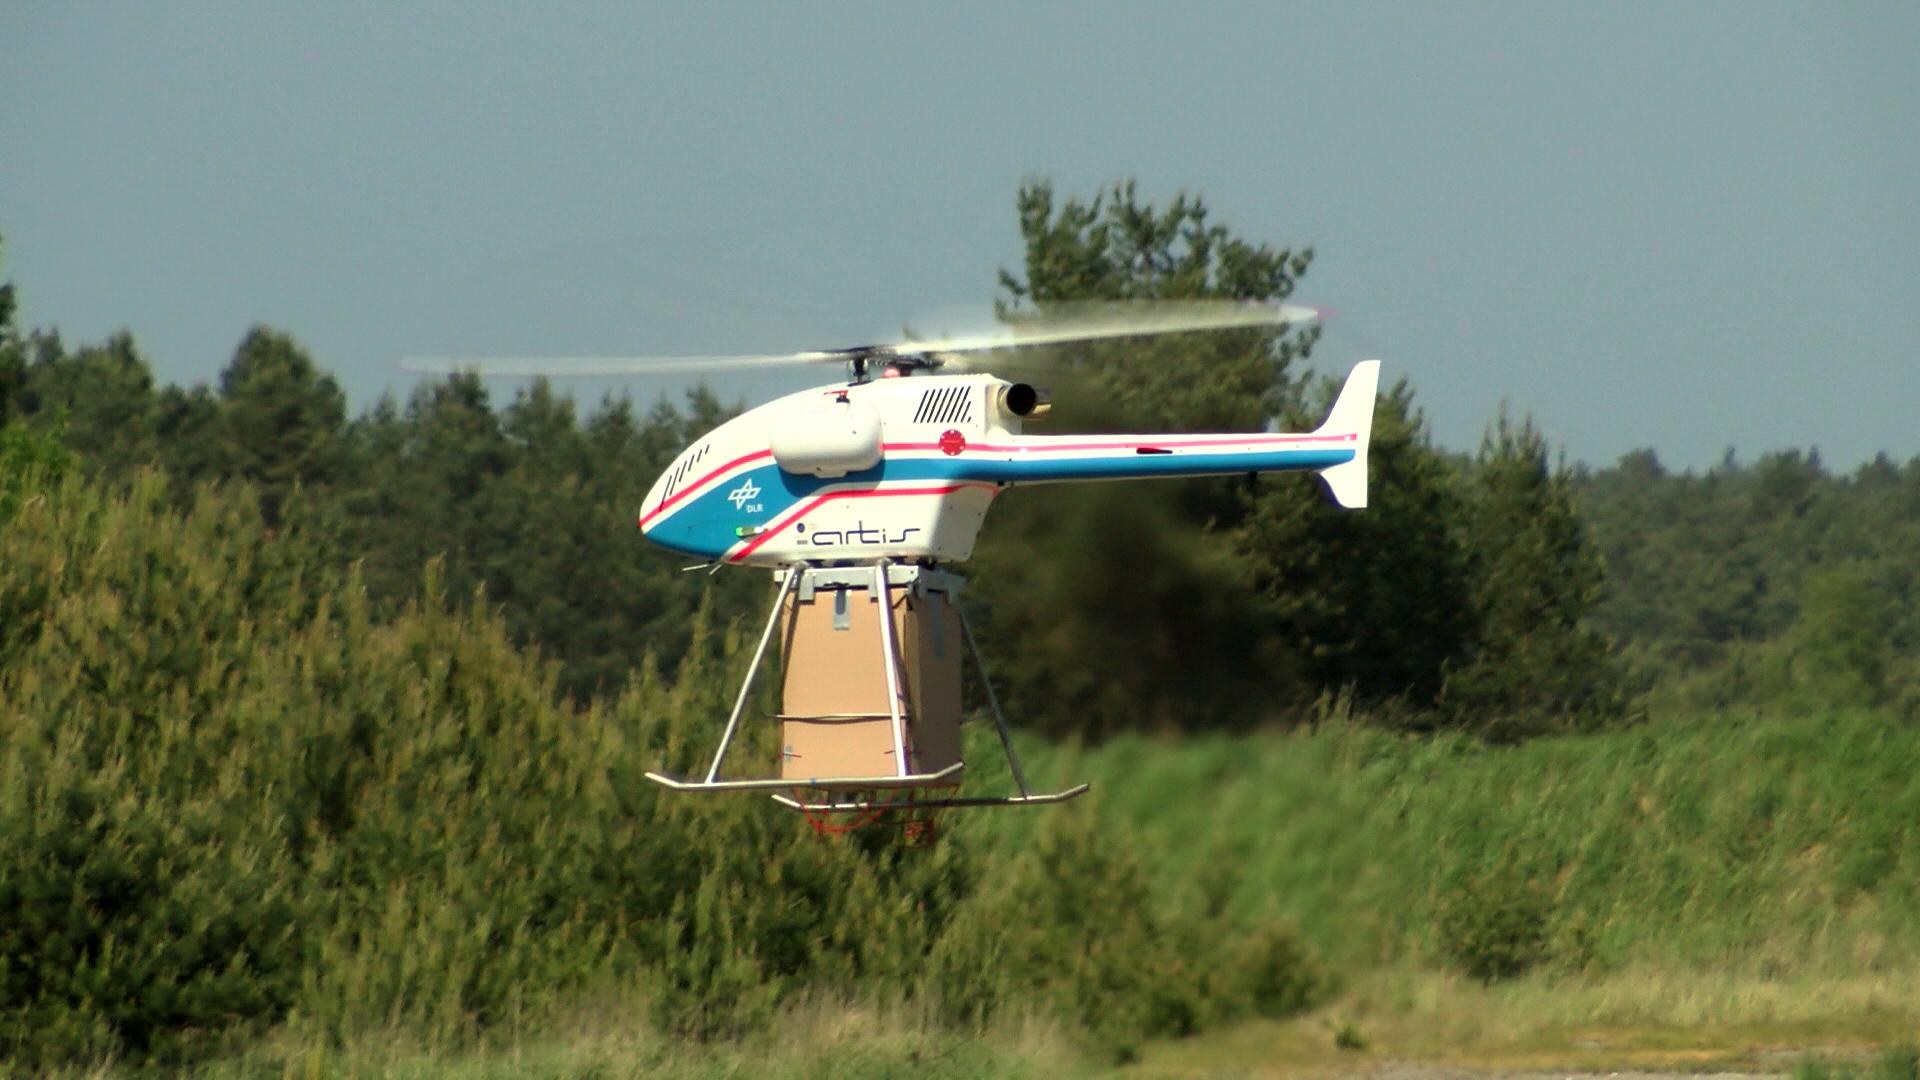 Uncrewed DLR superARTIS research helicopter with drop system for relief supplies